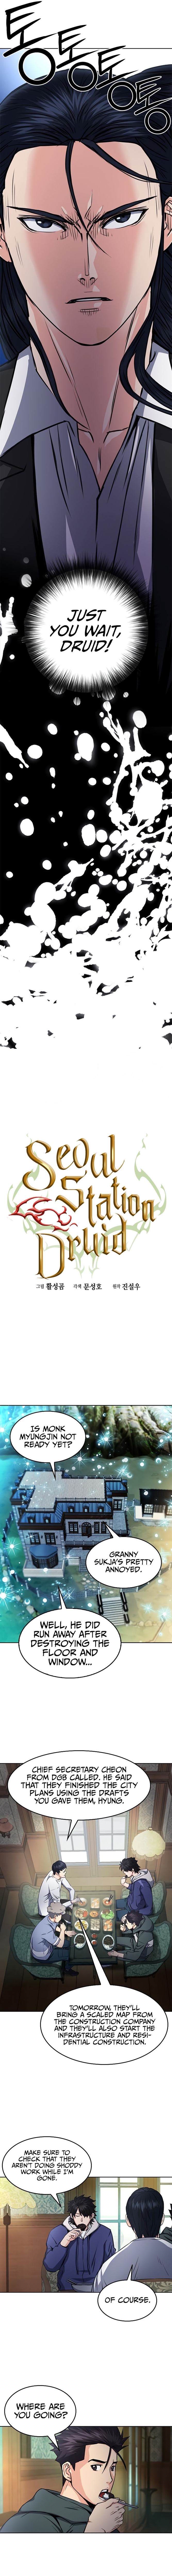 seoul station druid Chapter chapter 56